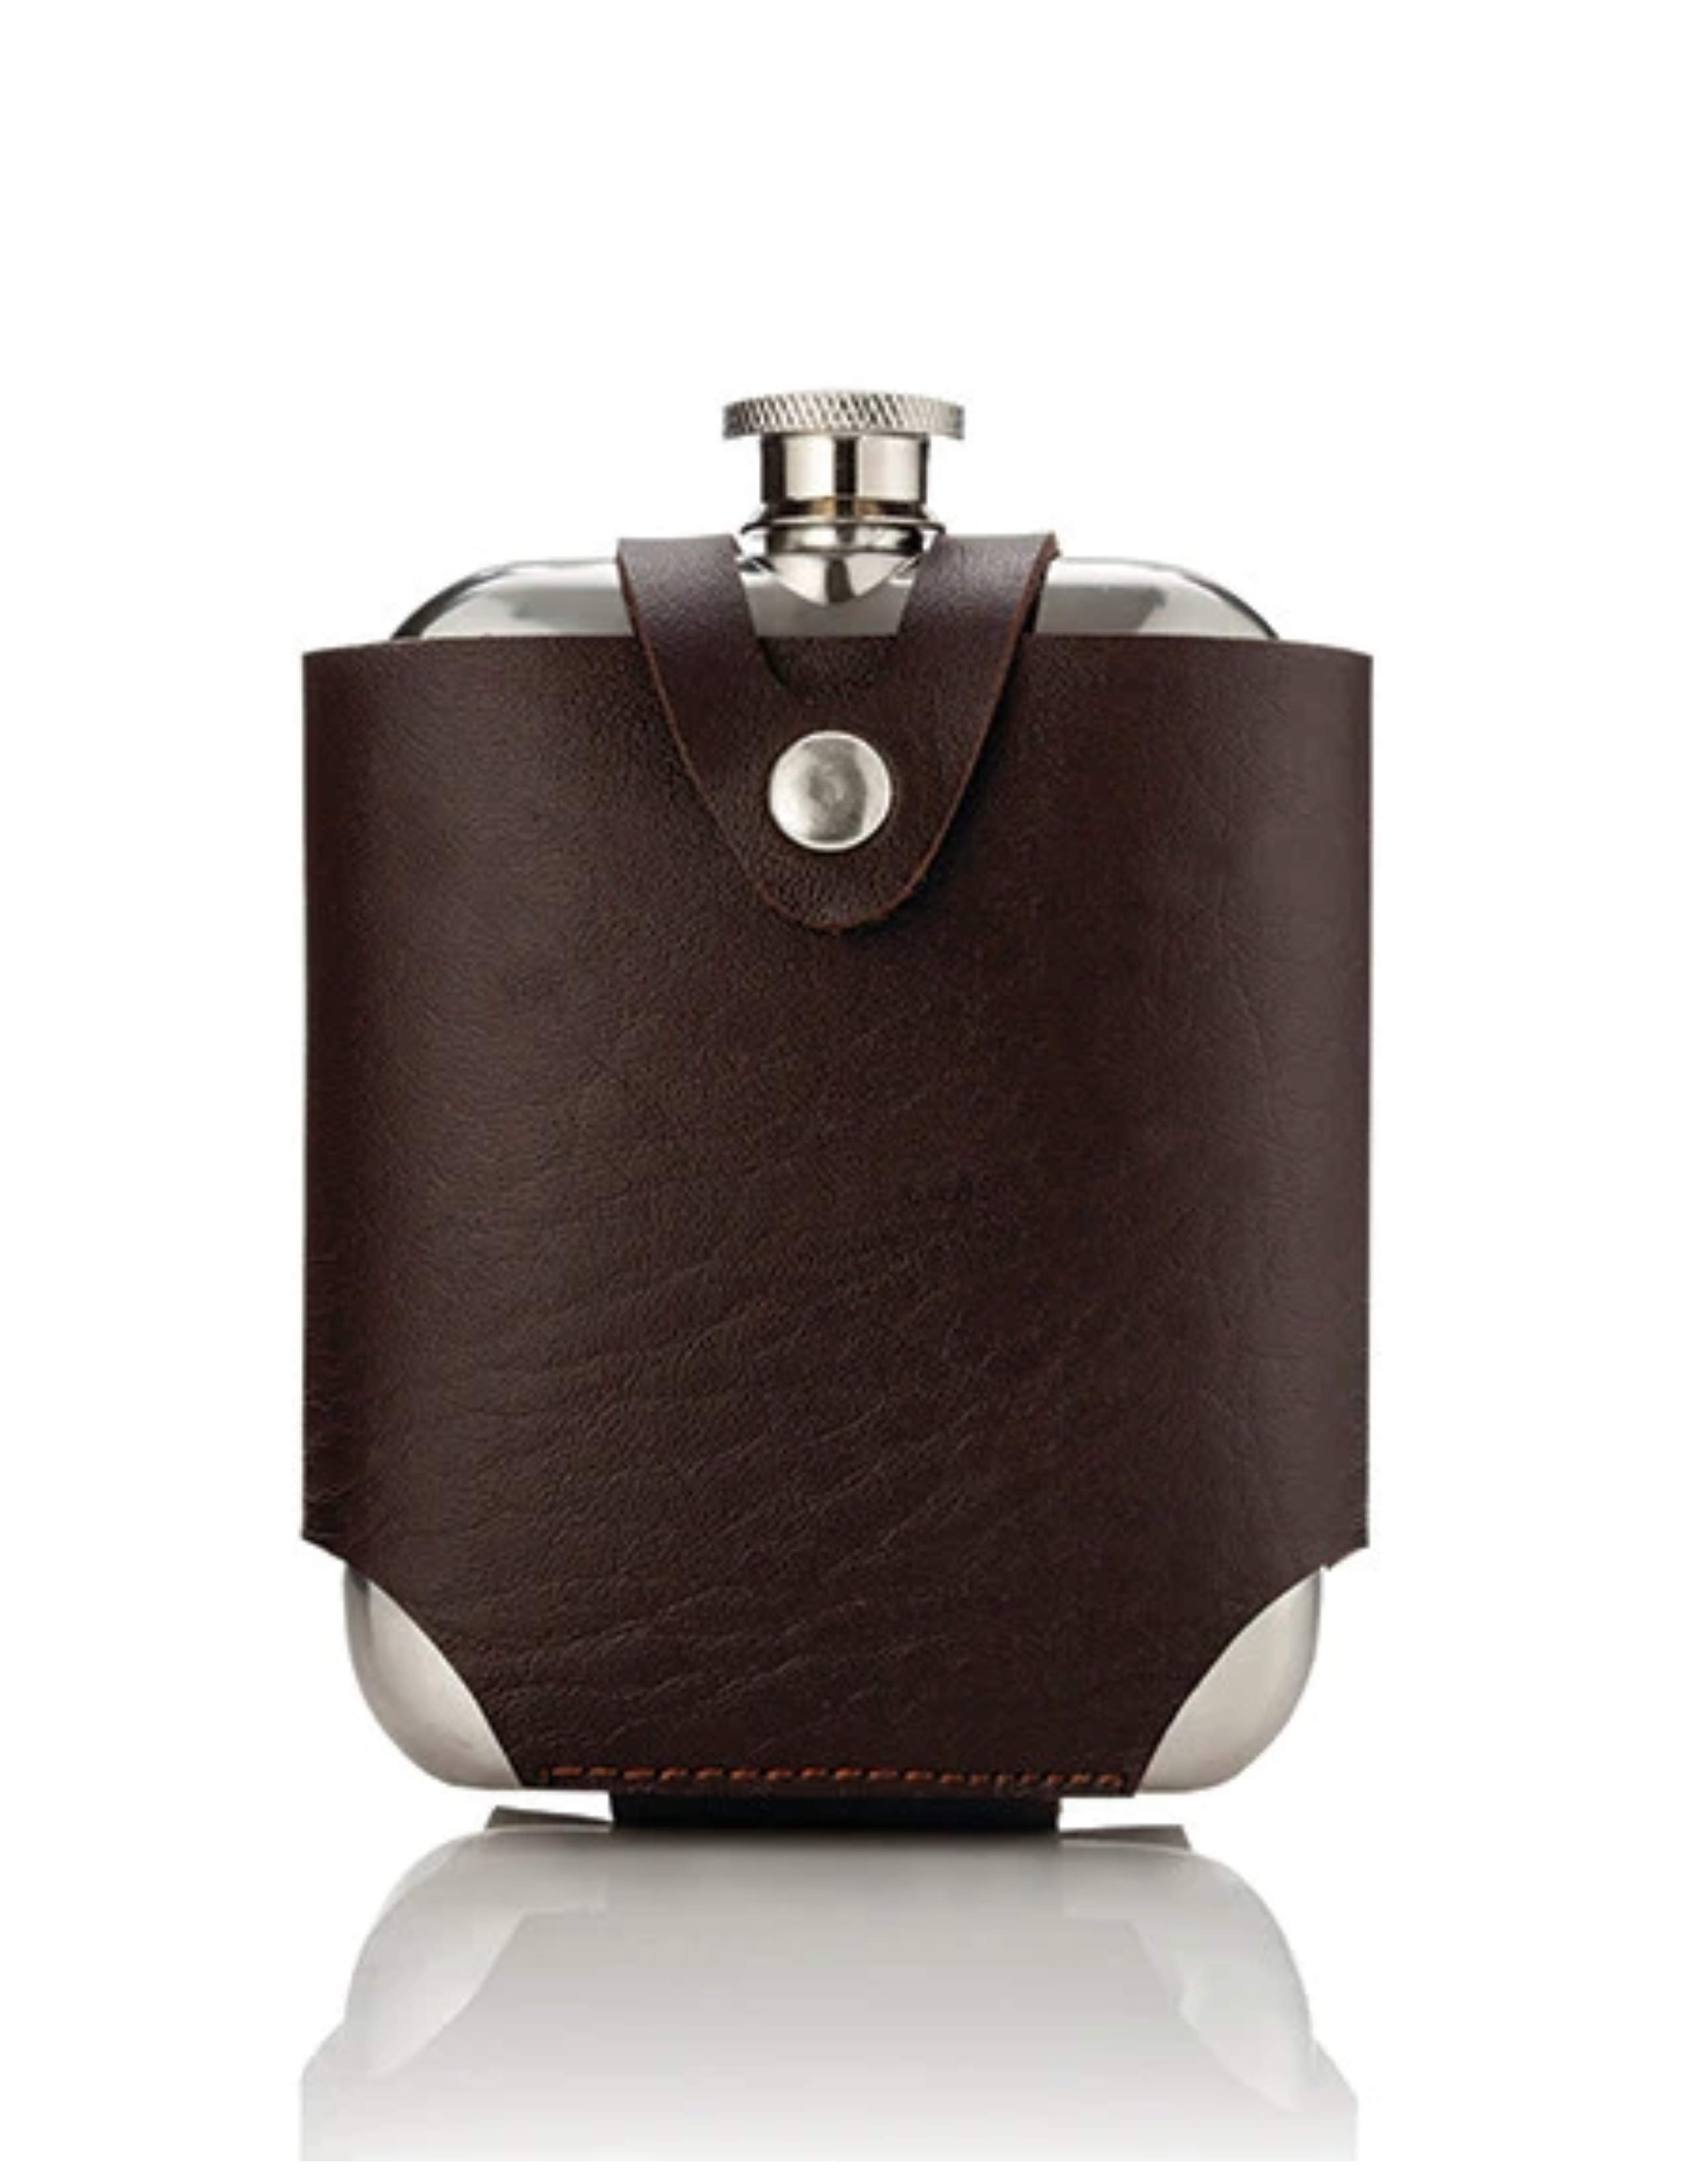 Stainless Steel Flask and Traveling Case